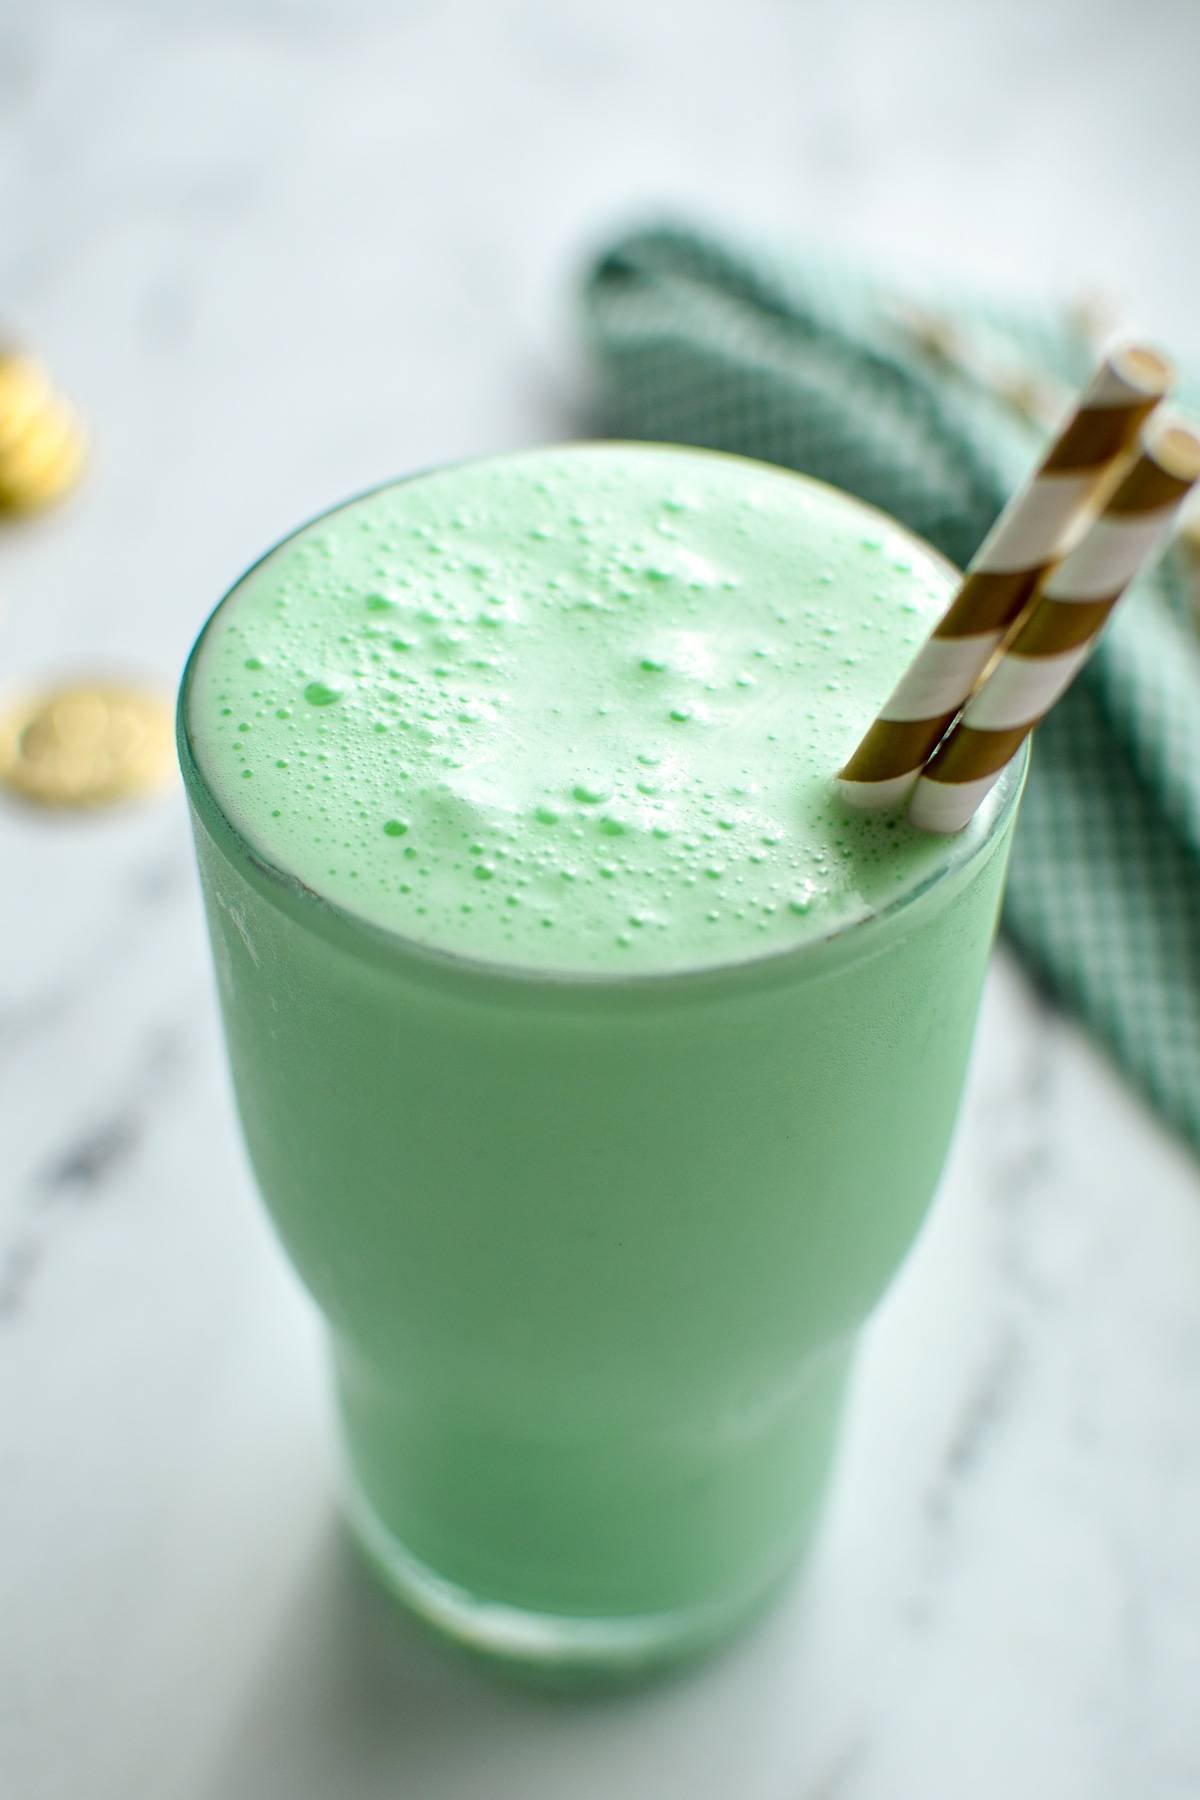 A glass filled with a green milkshake, with a gold striped set of straws sticking out.